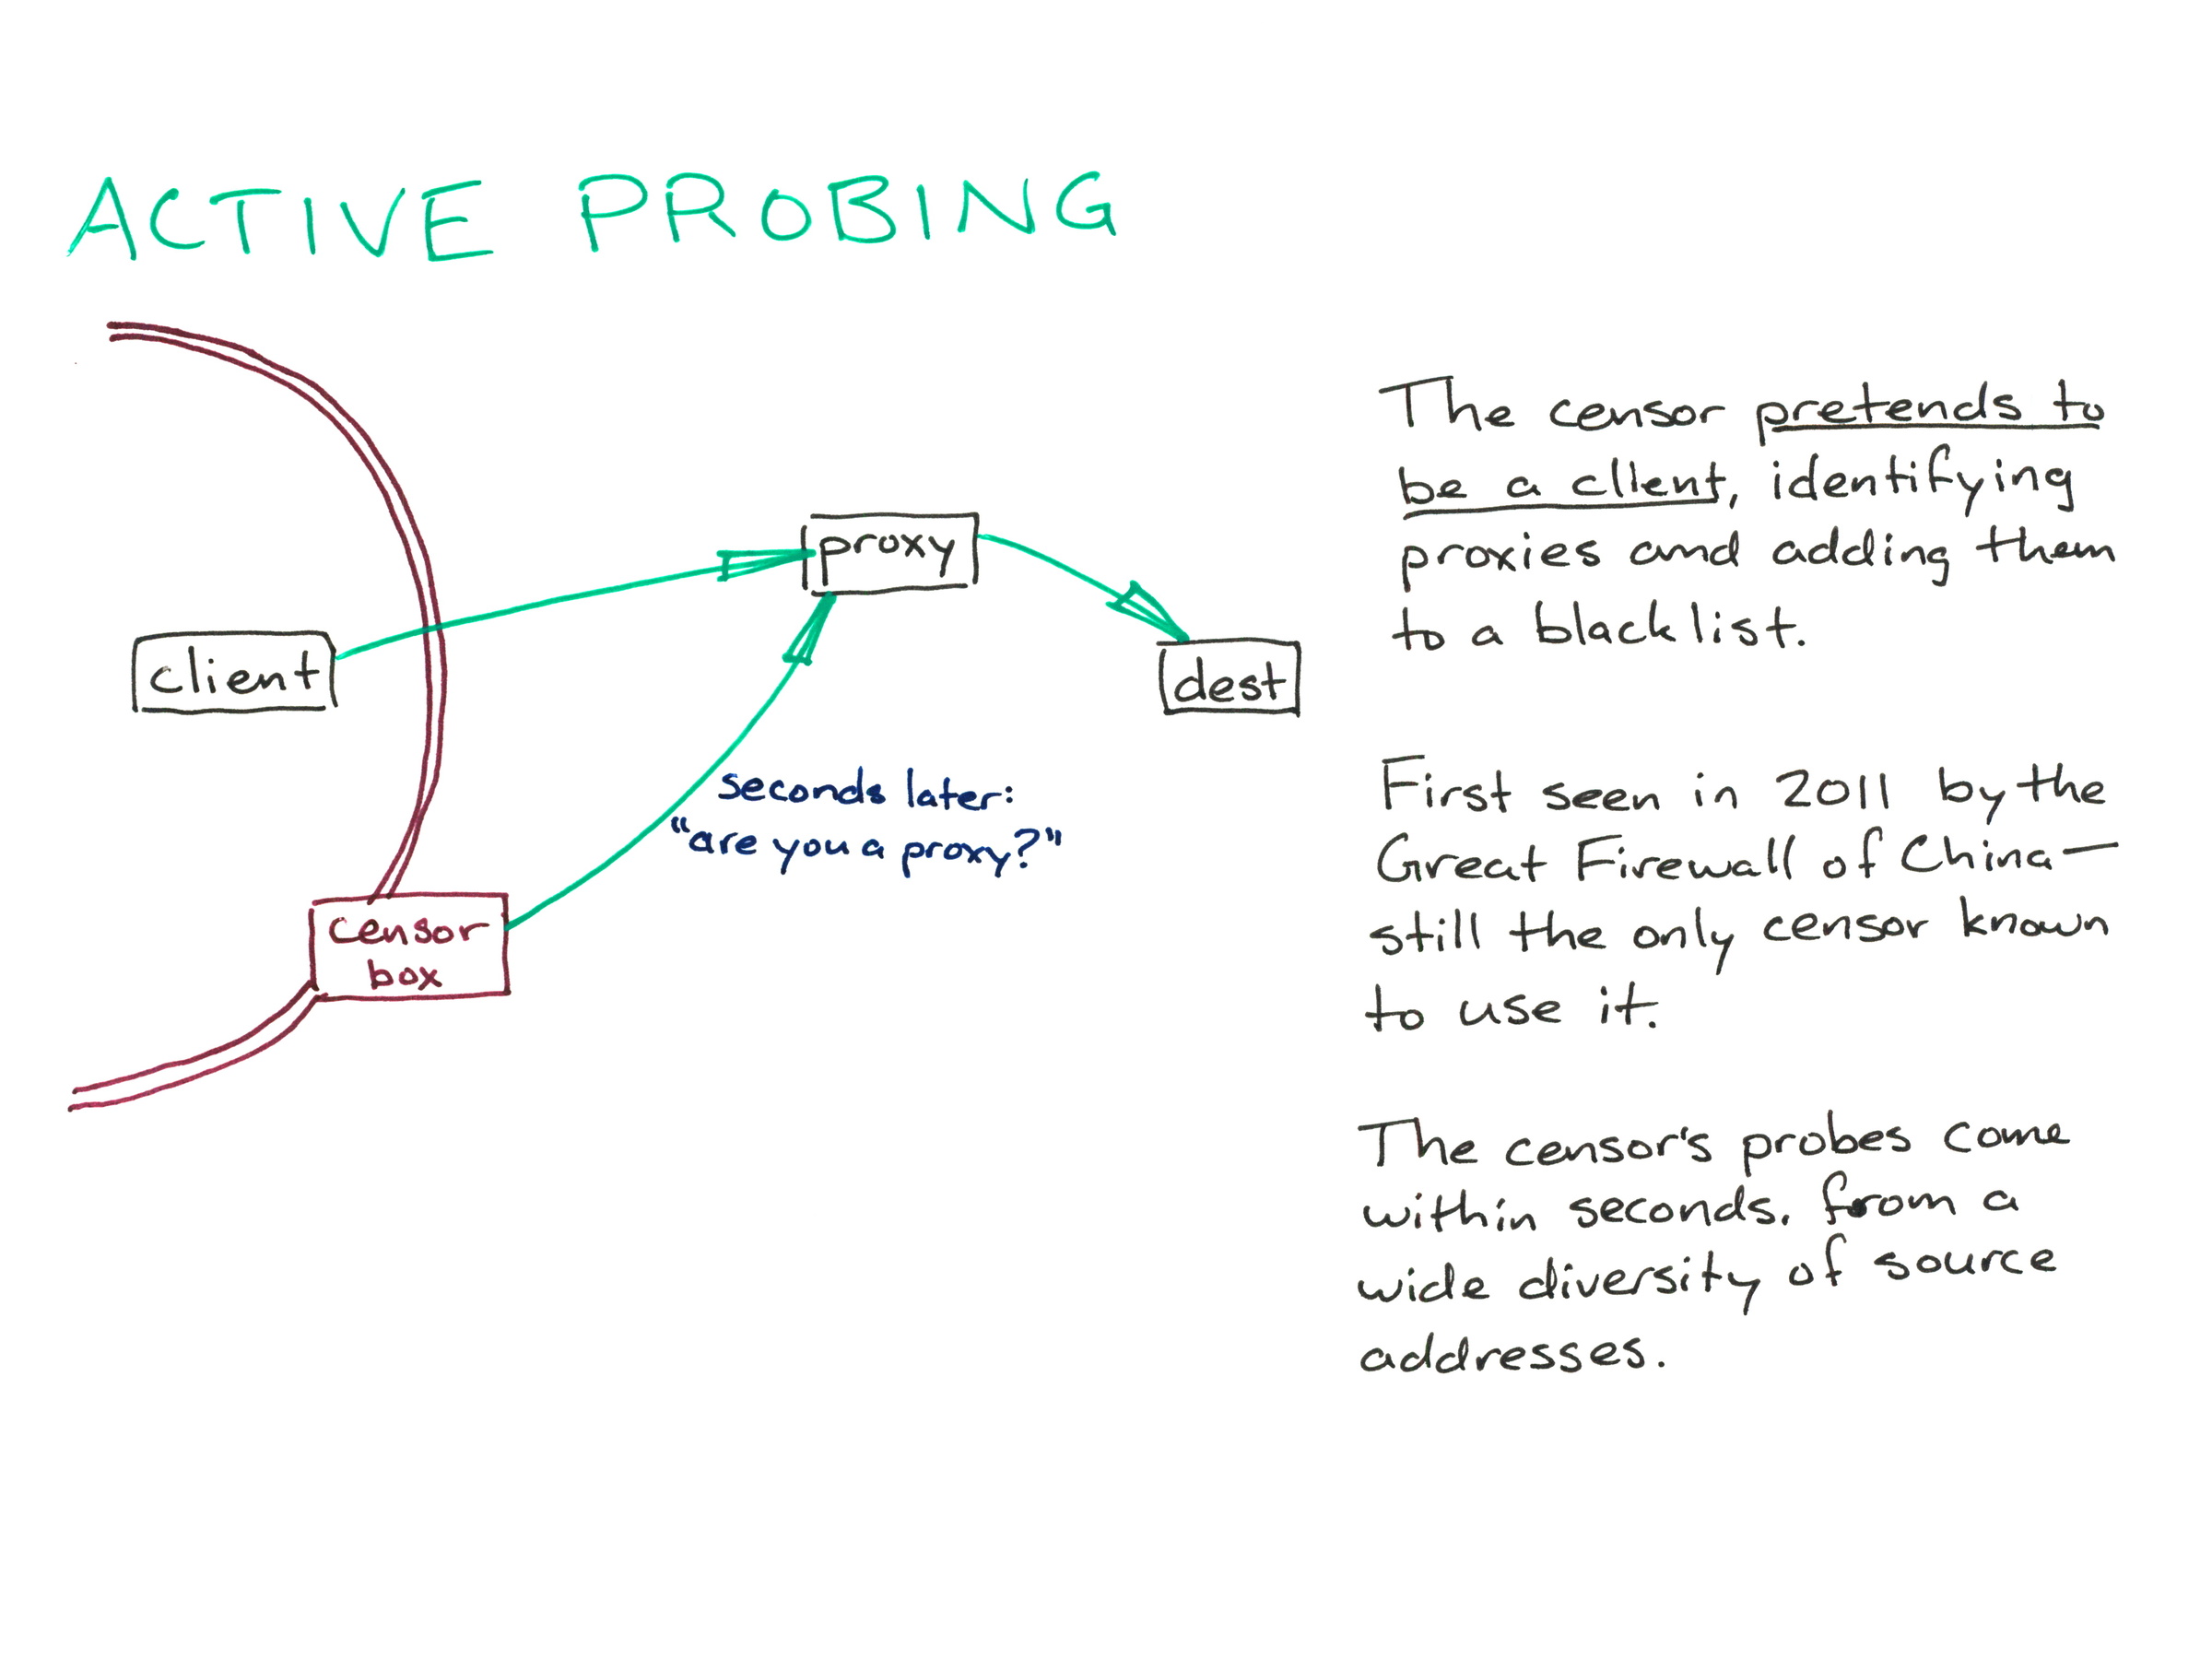 
ACTIVE PROBING

[diagram of active probing]

The censor pretends to be a client, identifying proxies and adding them to a blacklist.

First seen in 2011 by the Great Firewall of China – still the only censor known to use it.

The censor’s probes come within seconds, from a wide diversity of source addresses.
